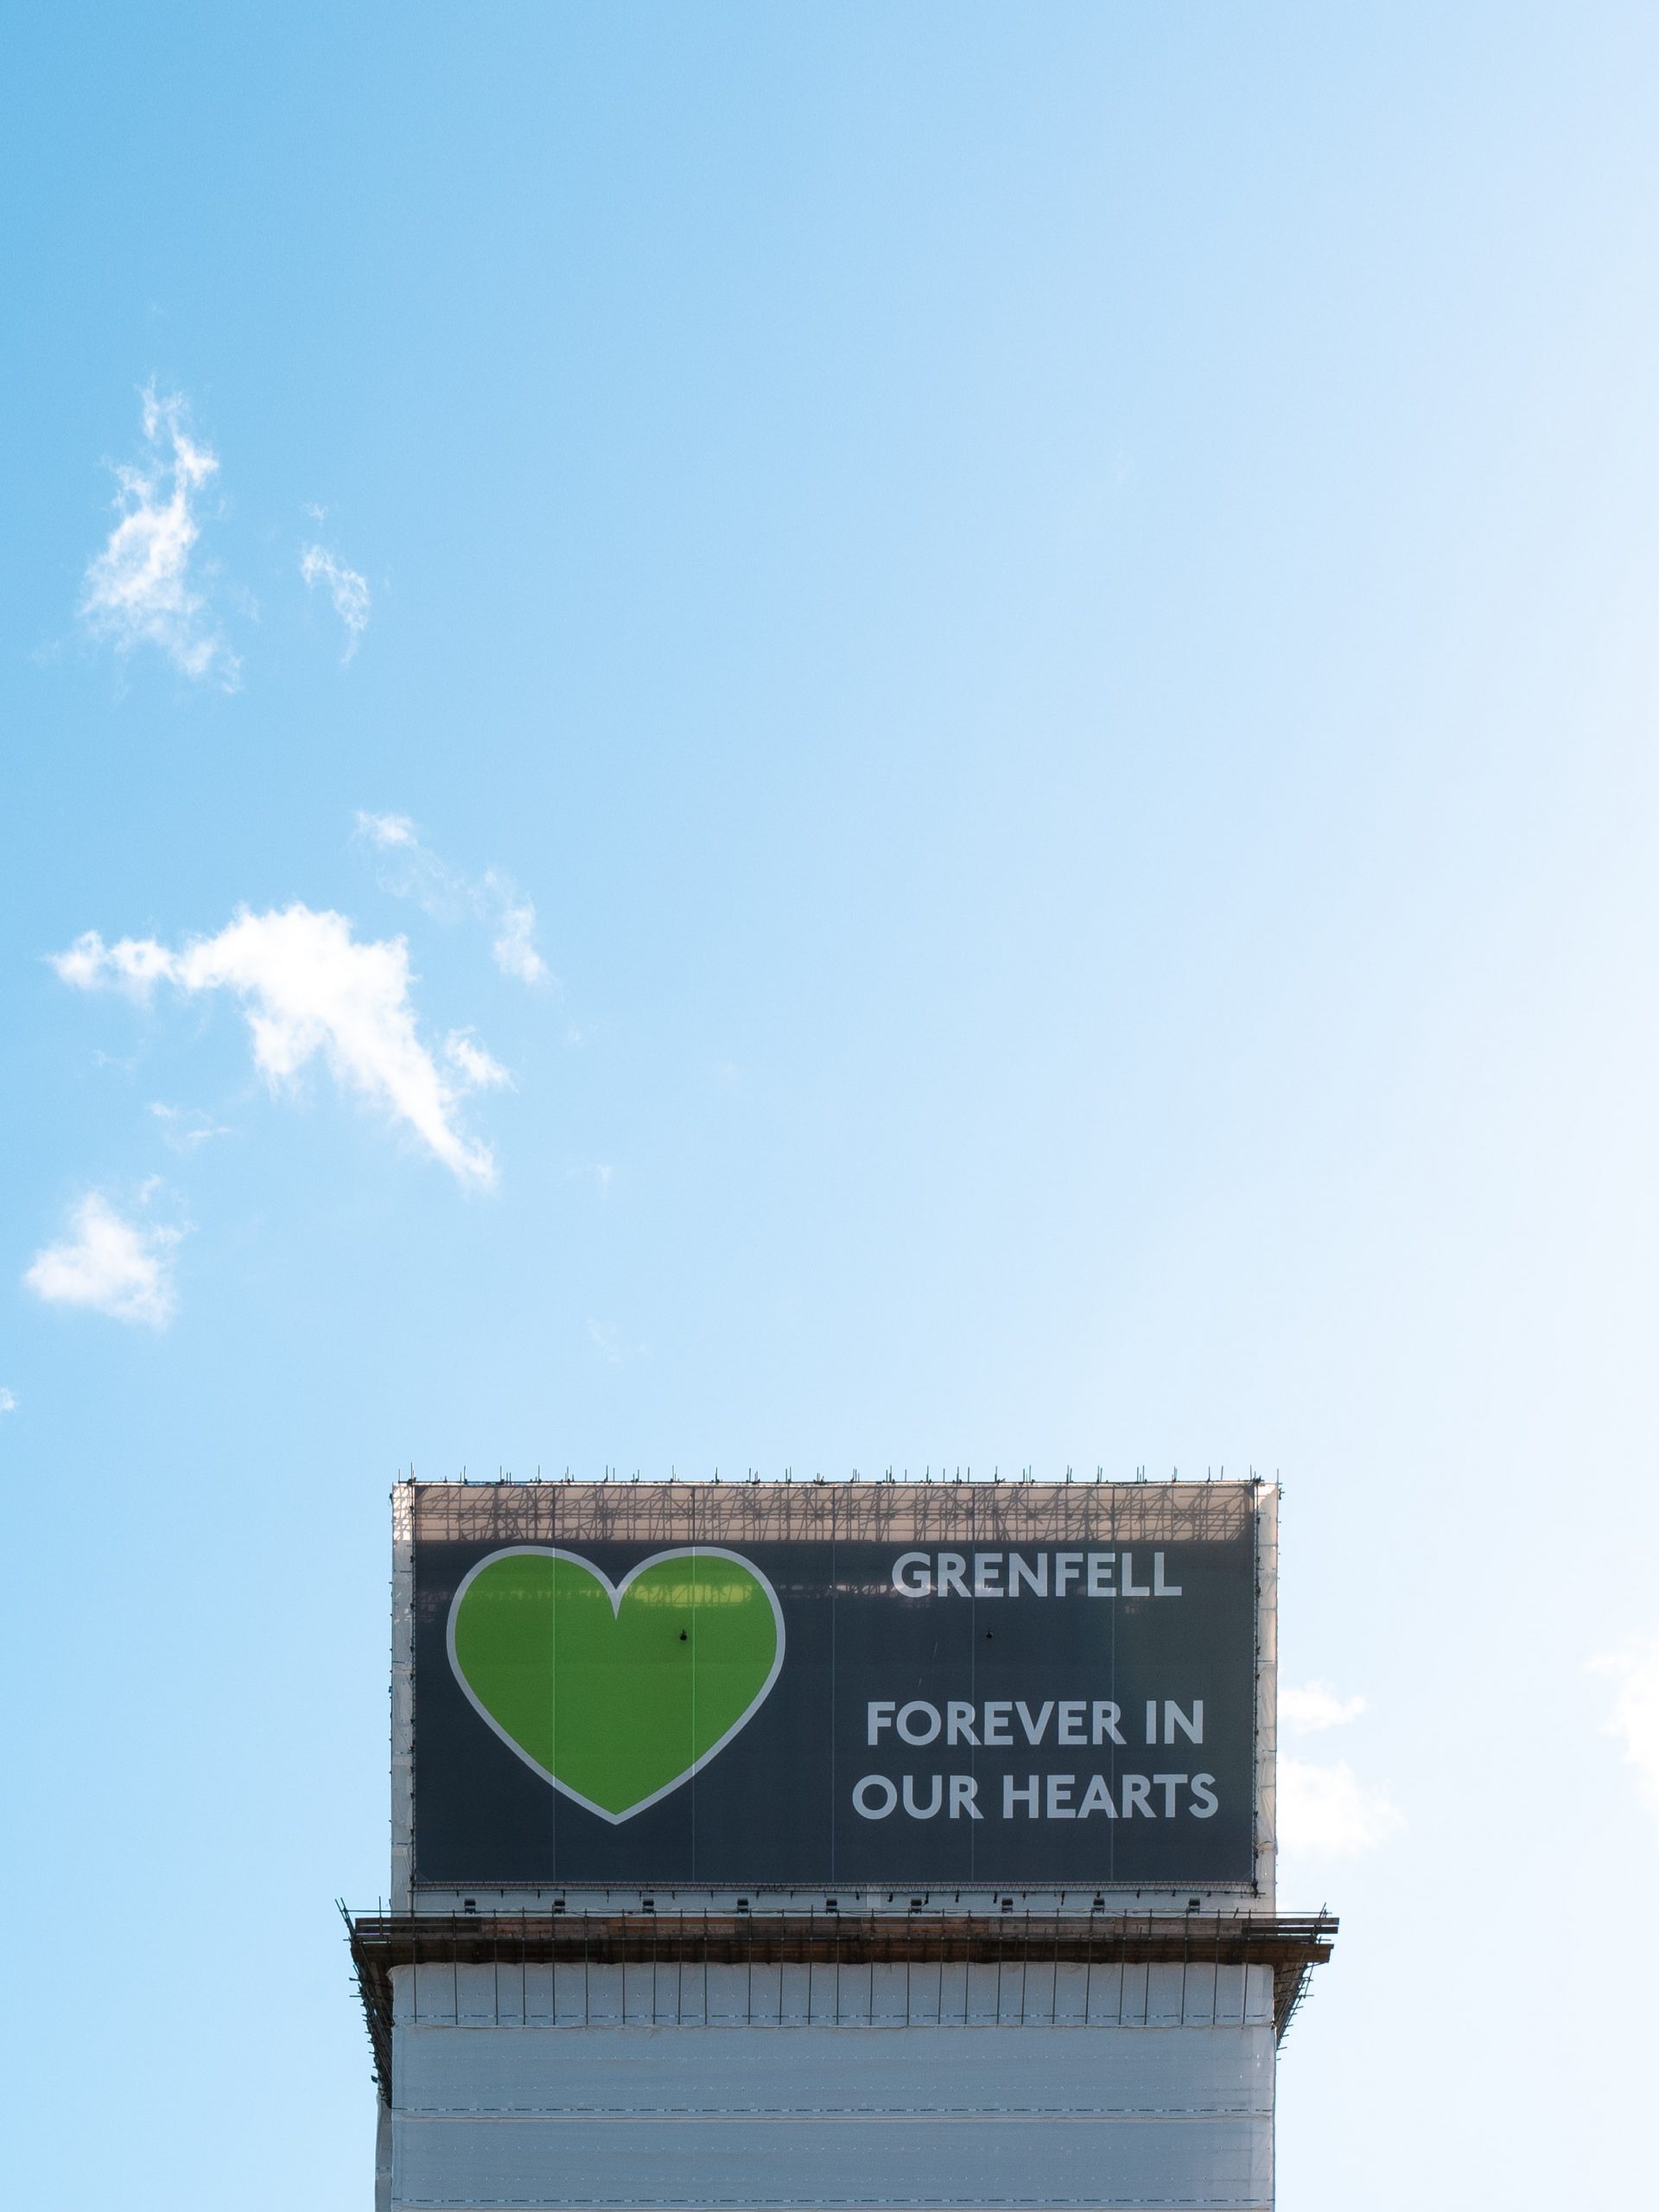 A close up of the top of the Grenfell tower reads "Grenfell forever in our hearts" 